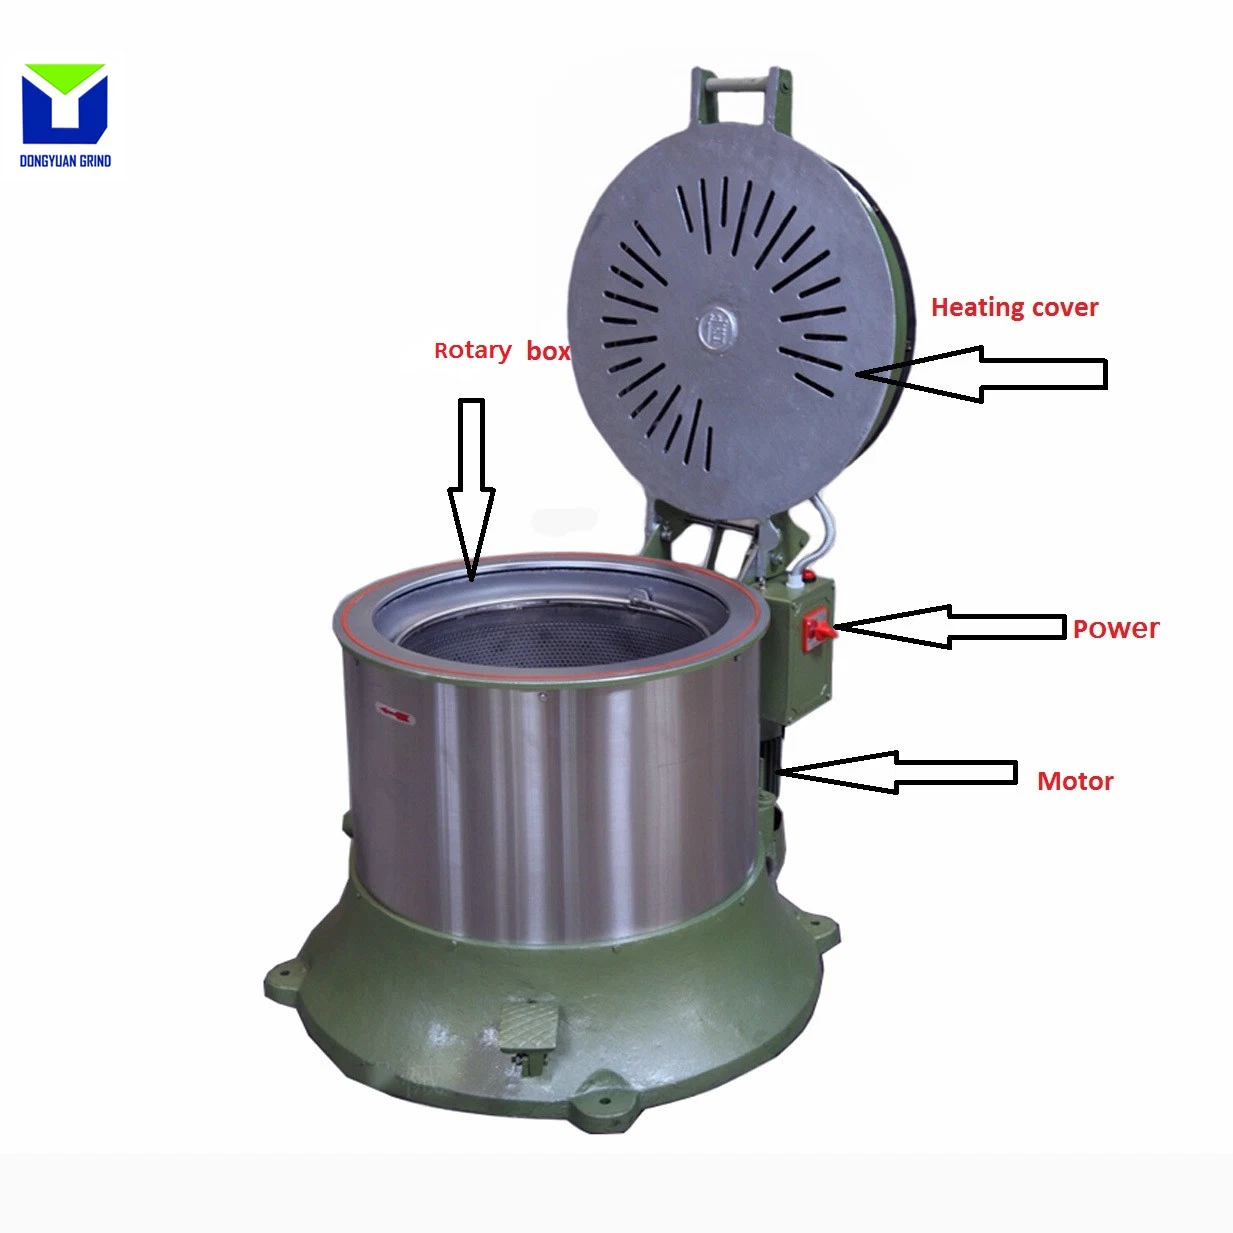 35kg-150kg Industrial Dewatering Machine Laundry Spin Dryer Hydro Extractor